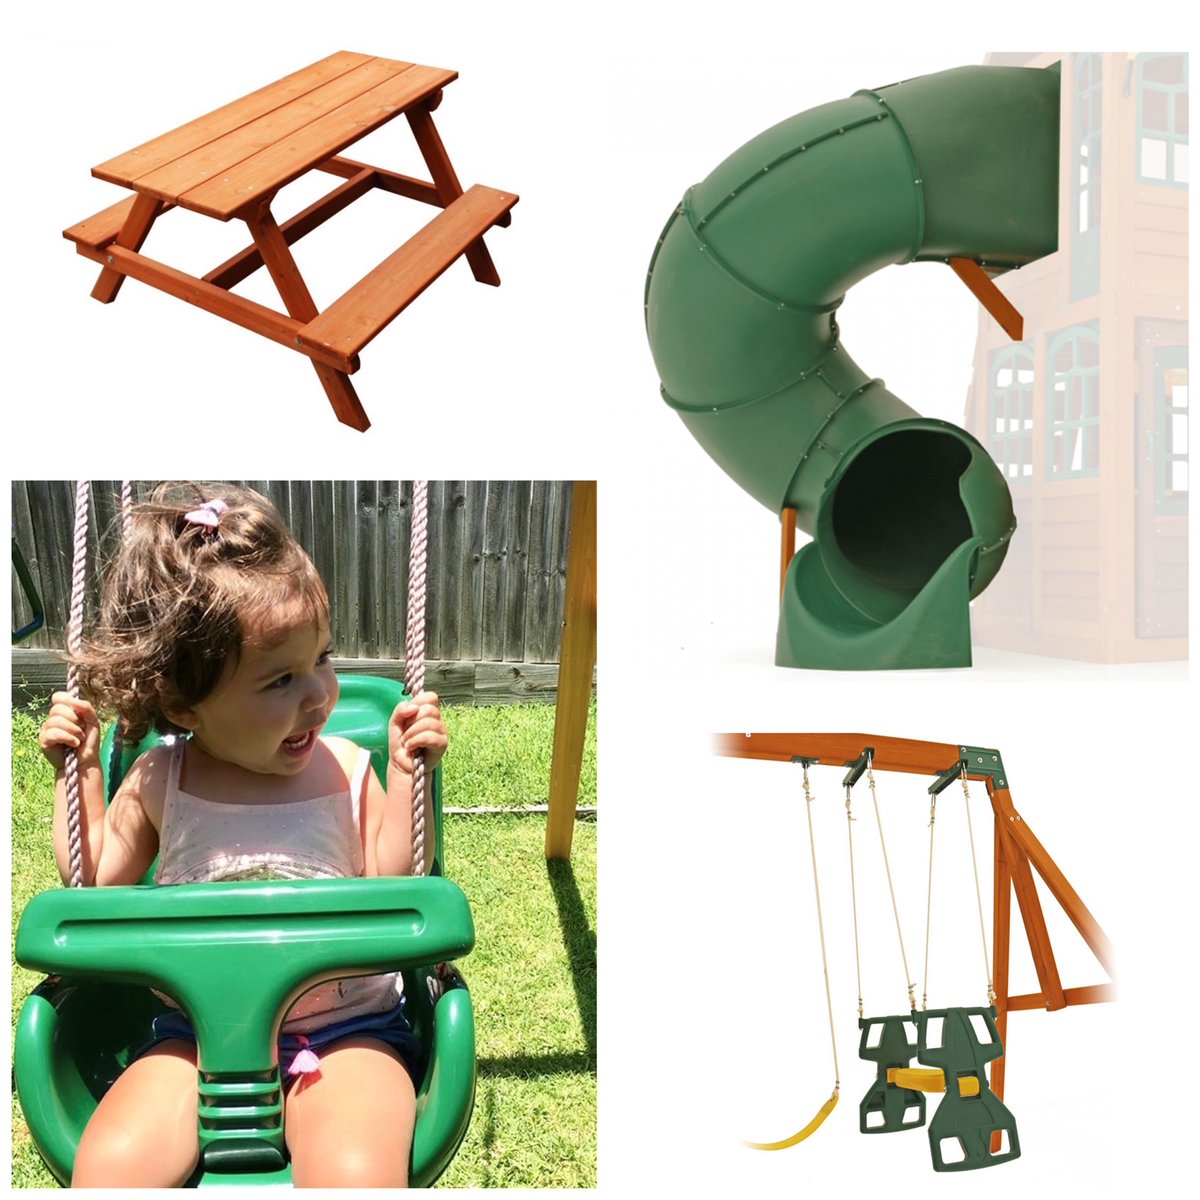 ⚠️Stock Clearance - All Accessories Reduced ⚠️
🔥Save up to 64% on all our accessories - reduced to clear 🔥
Shop Here: climbingframes.co.nz/accessories/
#climbingframesnewzealand#gardenclimbingframes #swings #slides #kidsslides #tubeslide #tunnelslide #babyseat #picnictable #gliderswing